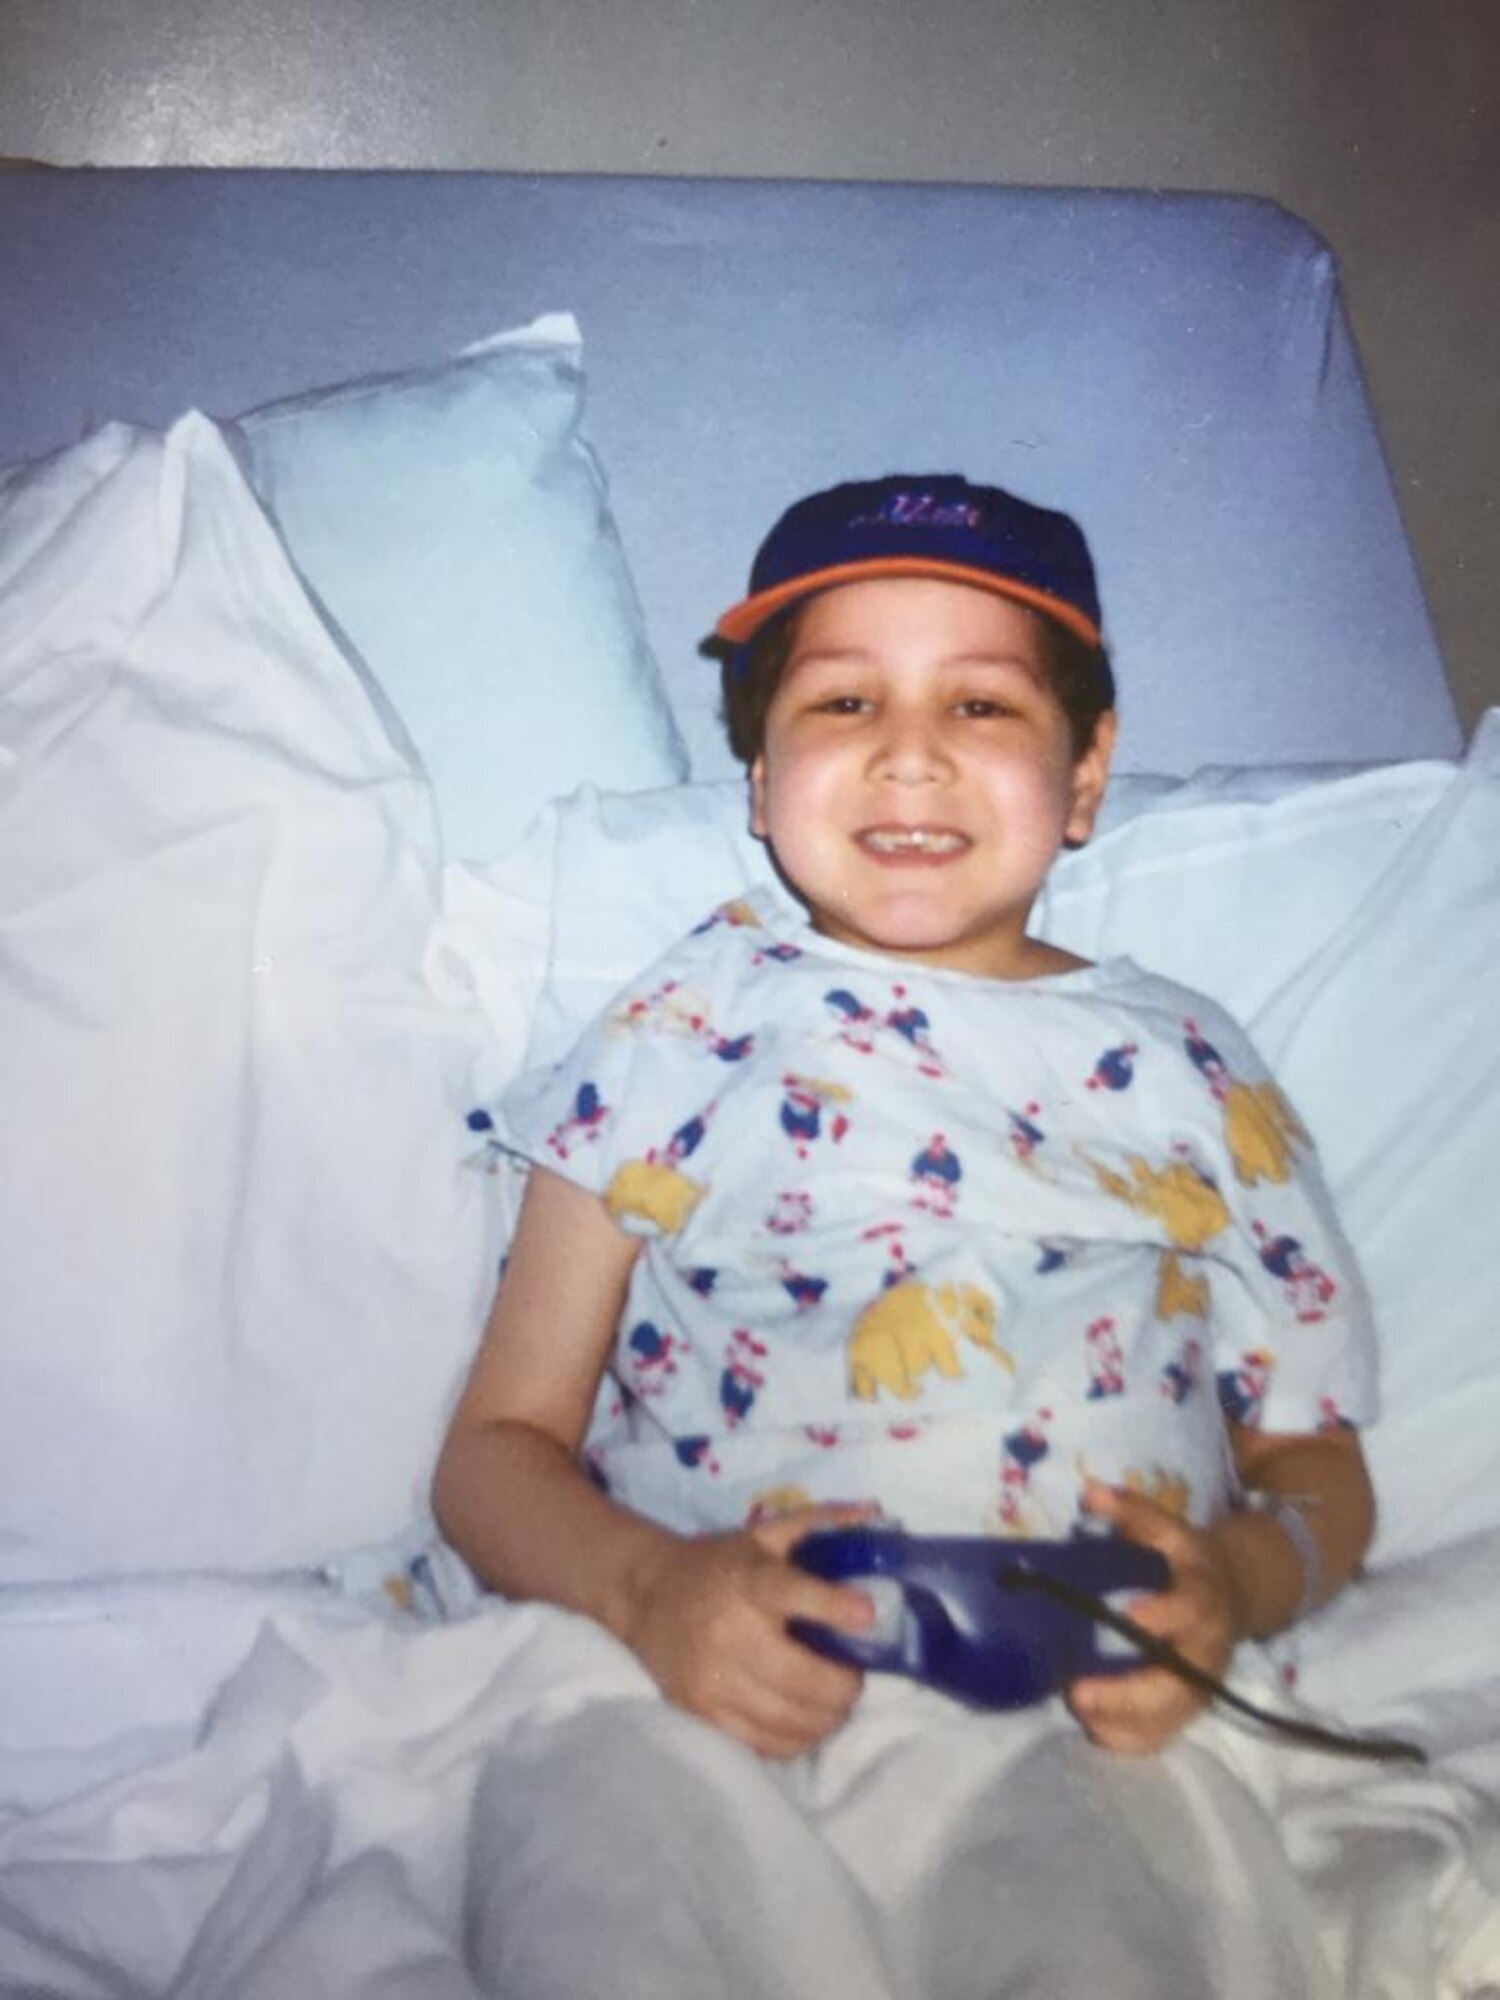 Airman 1st Class Isaiah A. Nieves, 2nd Maintenance Squadron aerospace ground equipment journeyman, plays video games in a hospital bed as a child. Nieves was diagnosed with Acute Lymphoblastic Leukemia at the age of four. (Courtesy photo)